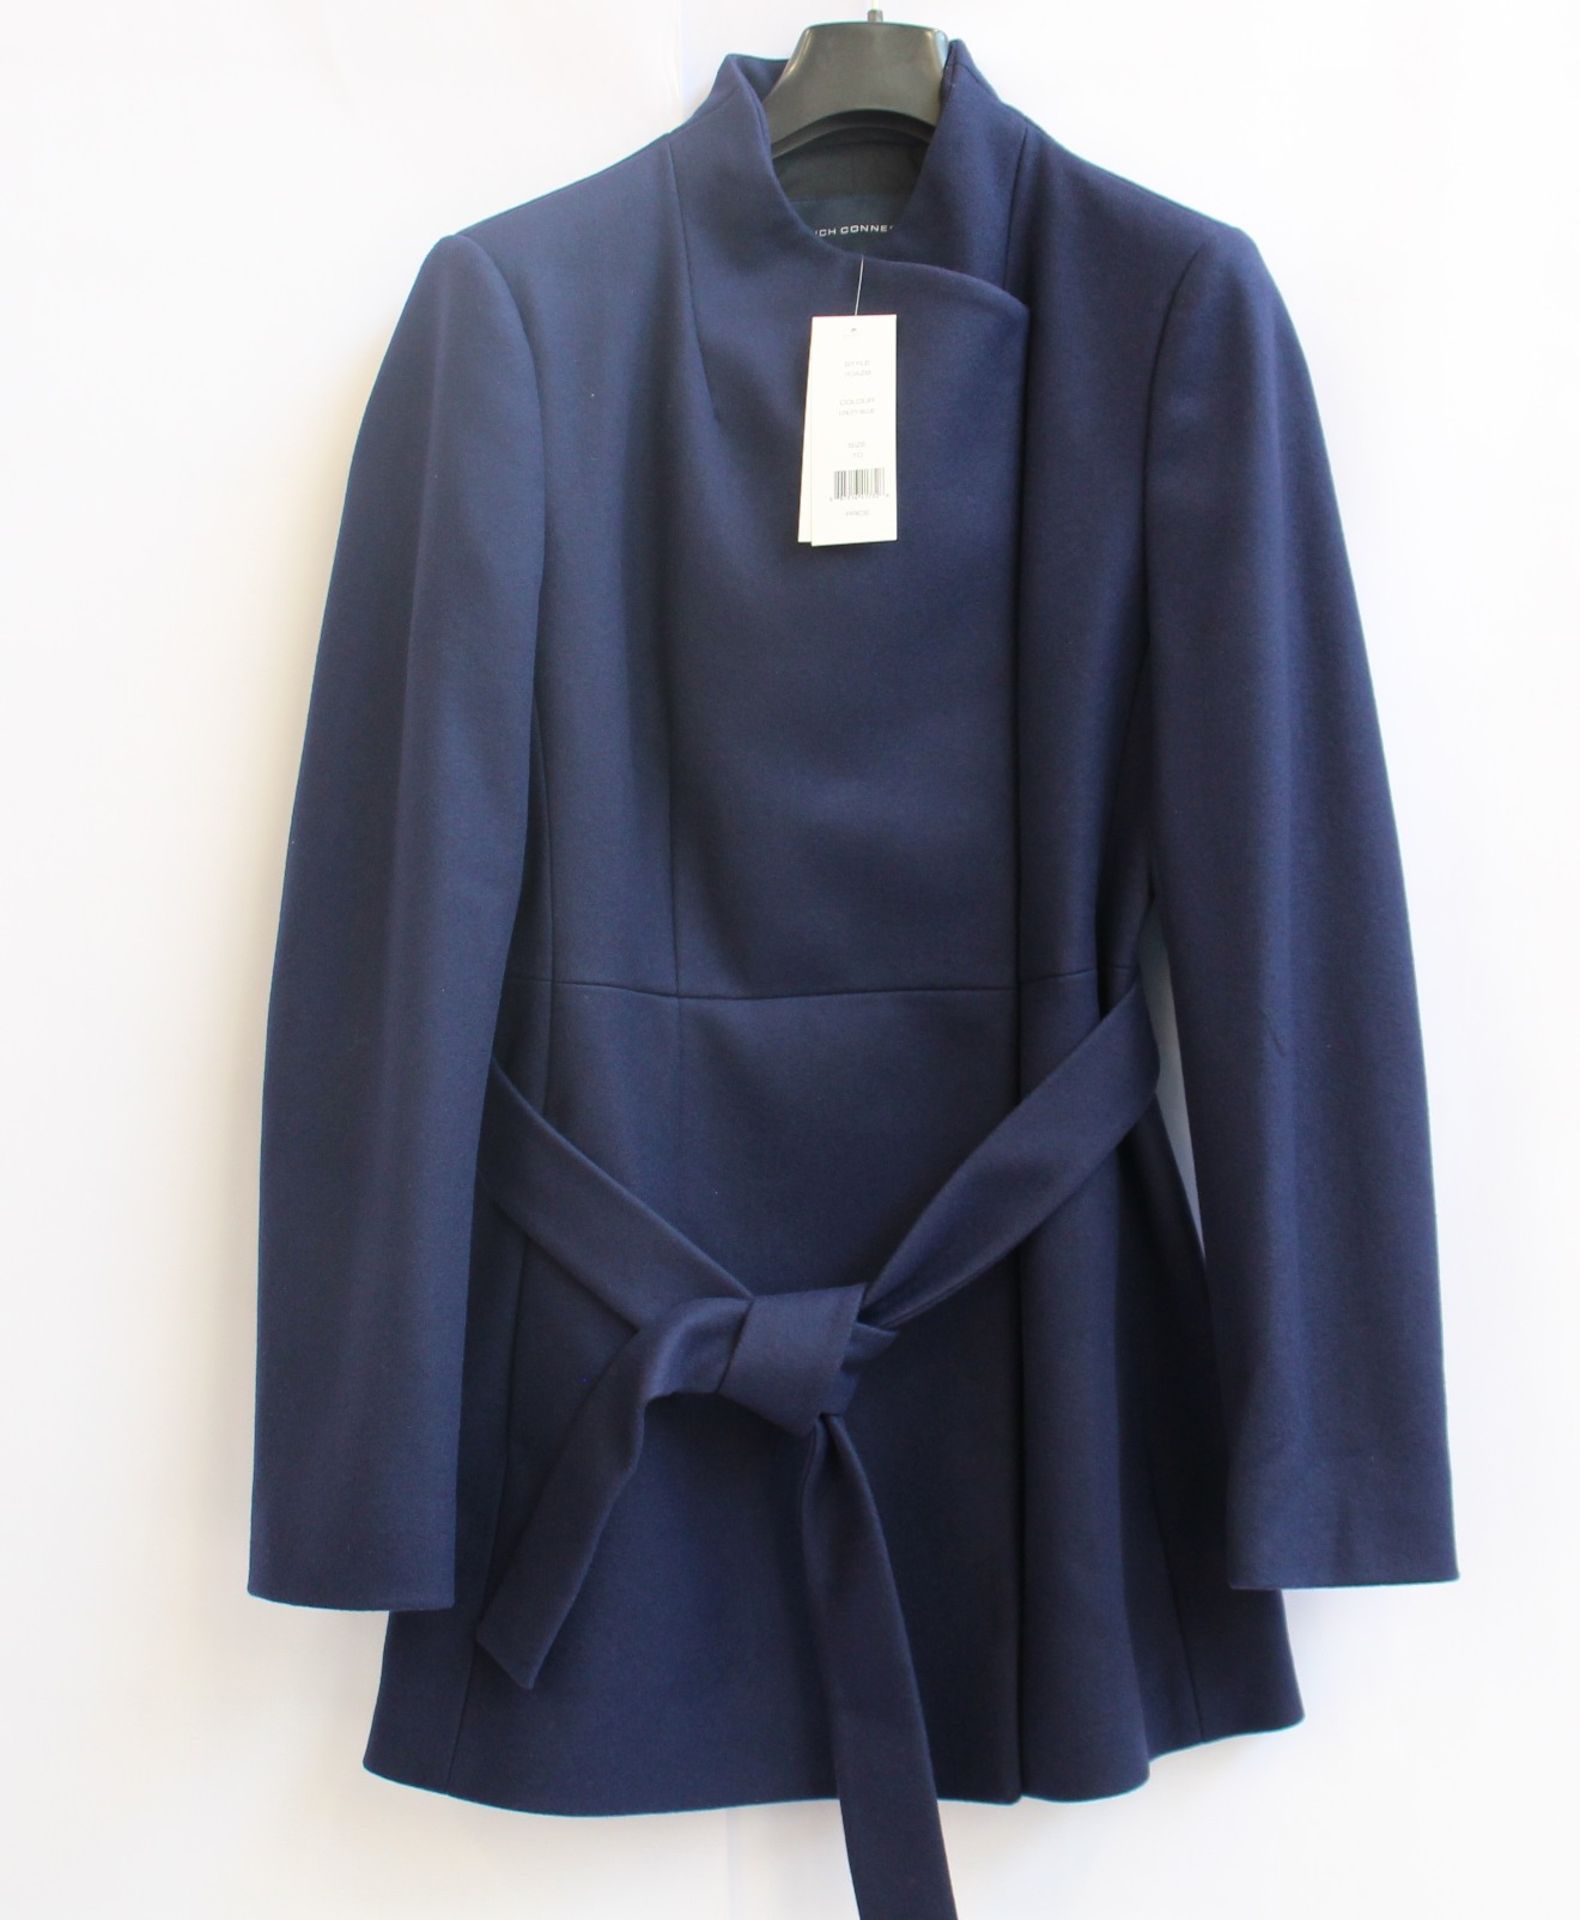 An as new French Connection platform felt crossover coat (Size 10 - RRP £190).